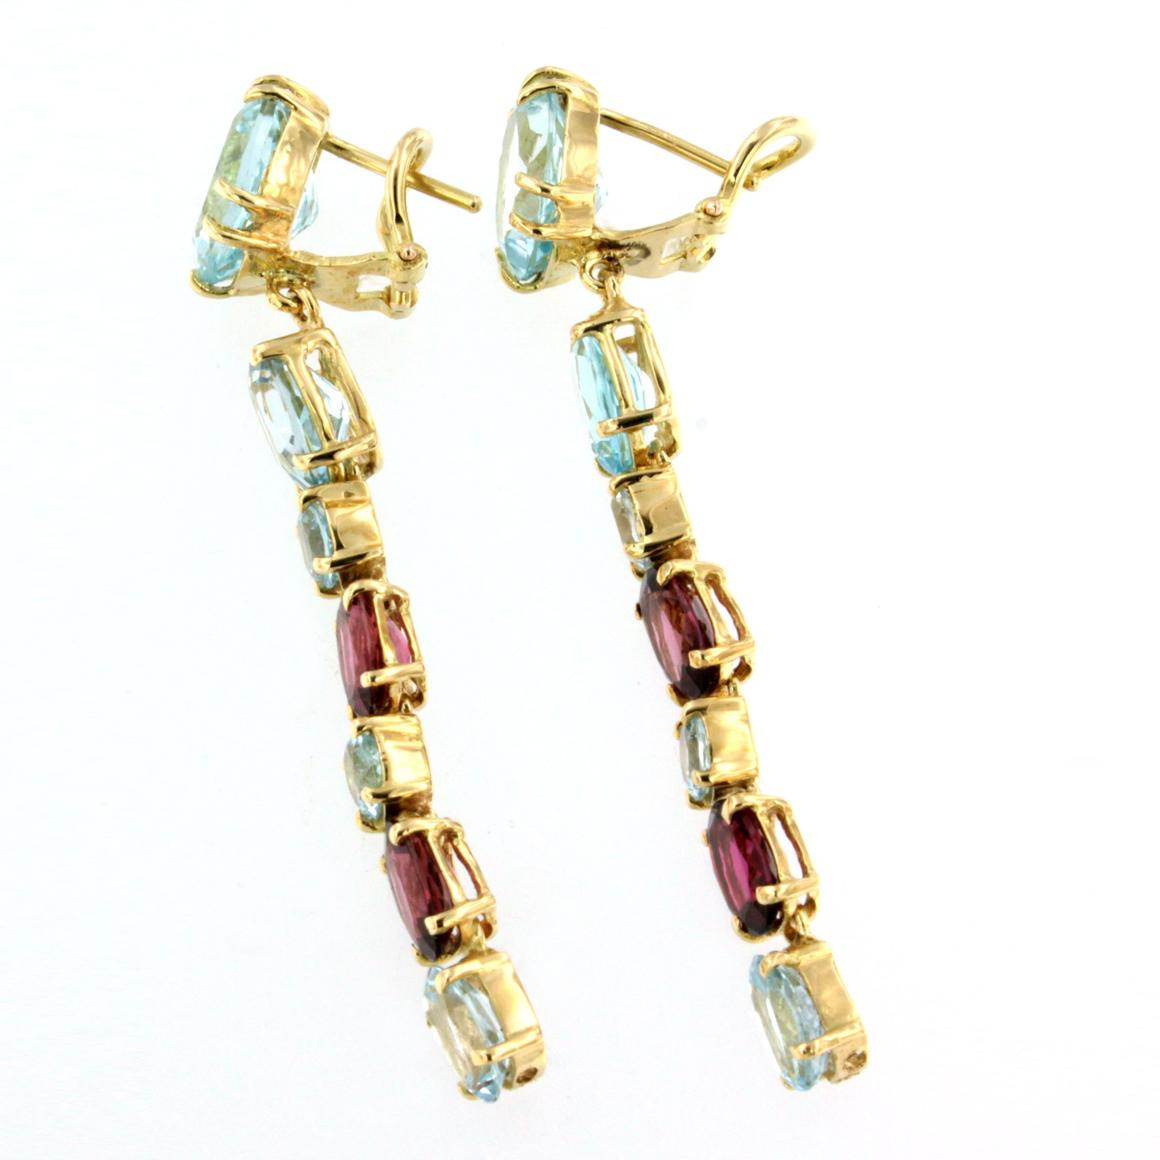 Oval Cut 18k Rose Yellow Gold with Blue Topaz and Pink Tourmaline Earrings